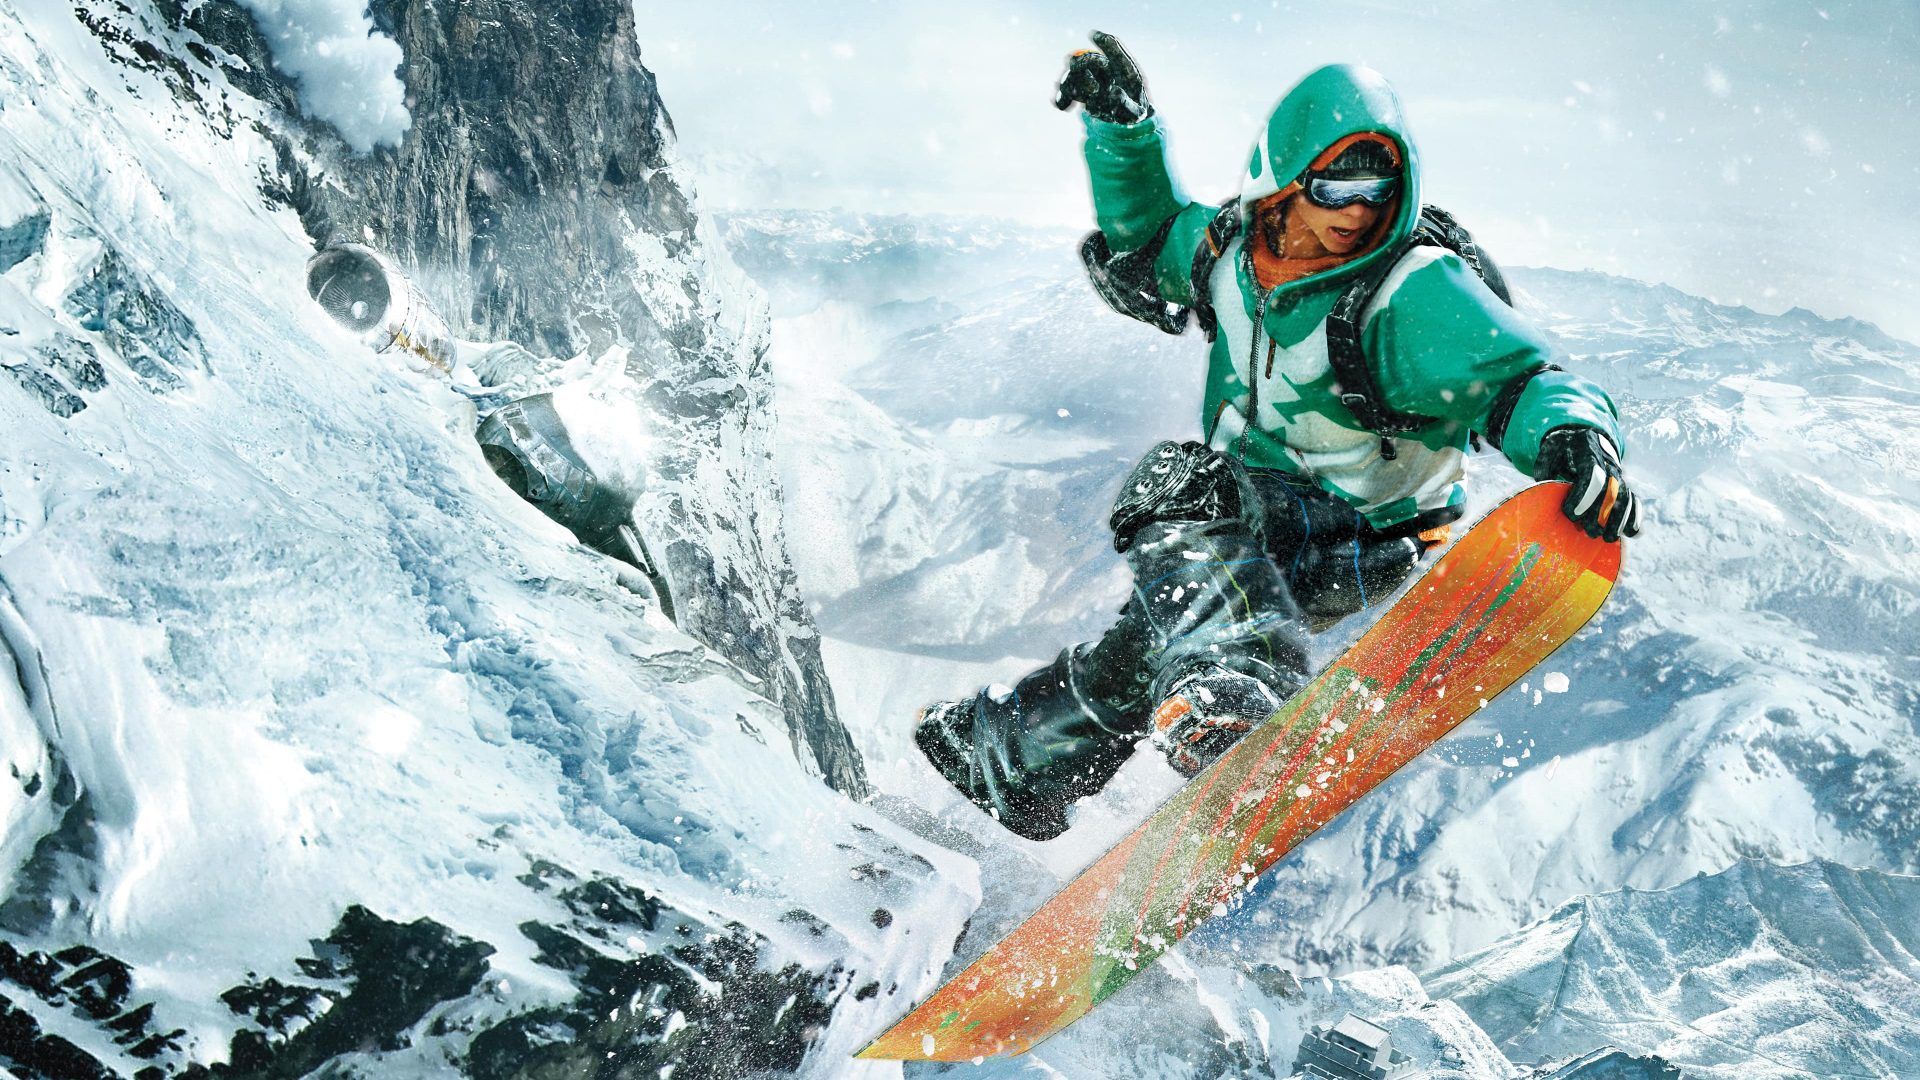 The Need for Speed team helped turn SSX into a high-speed downhill racer